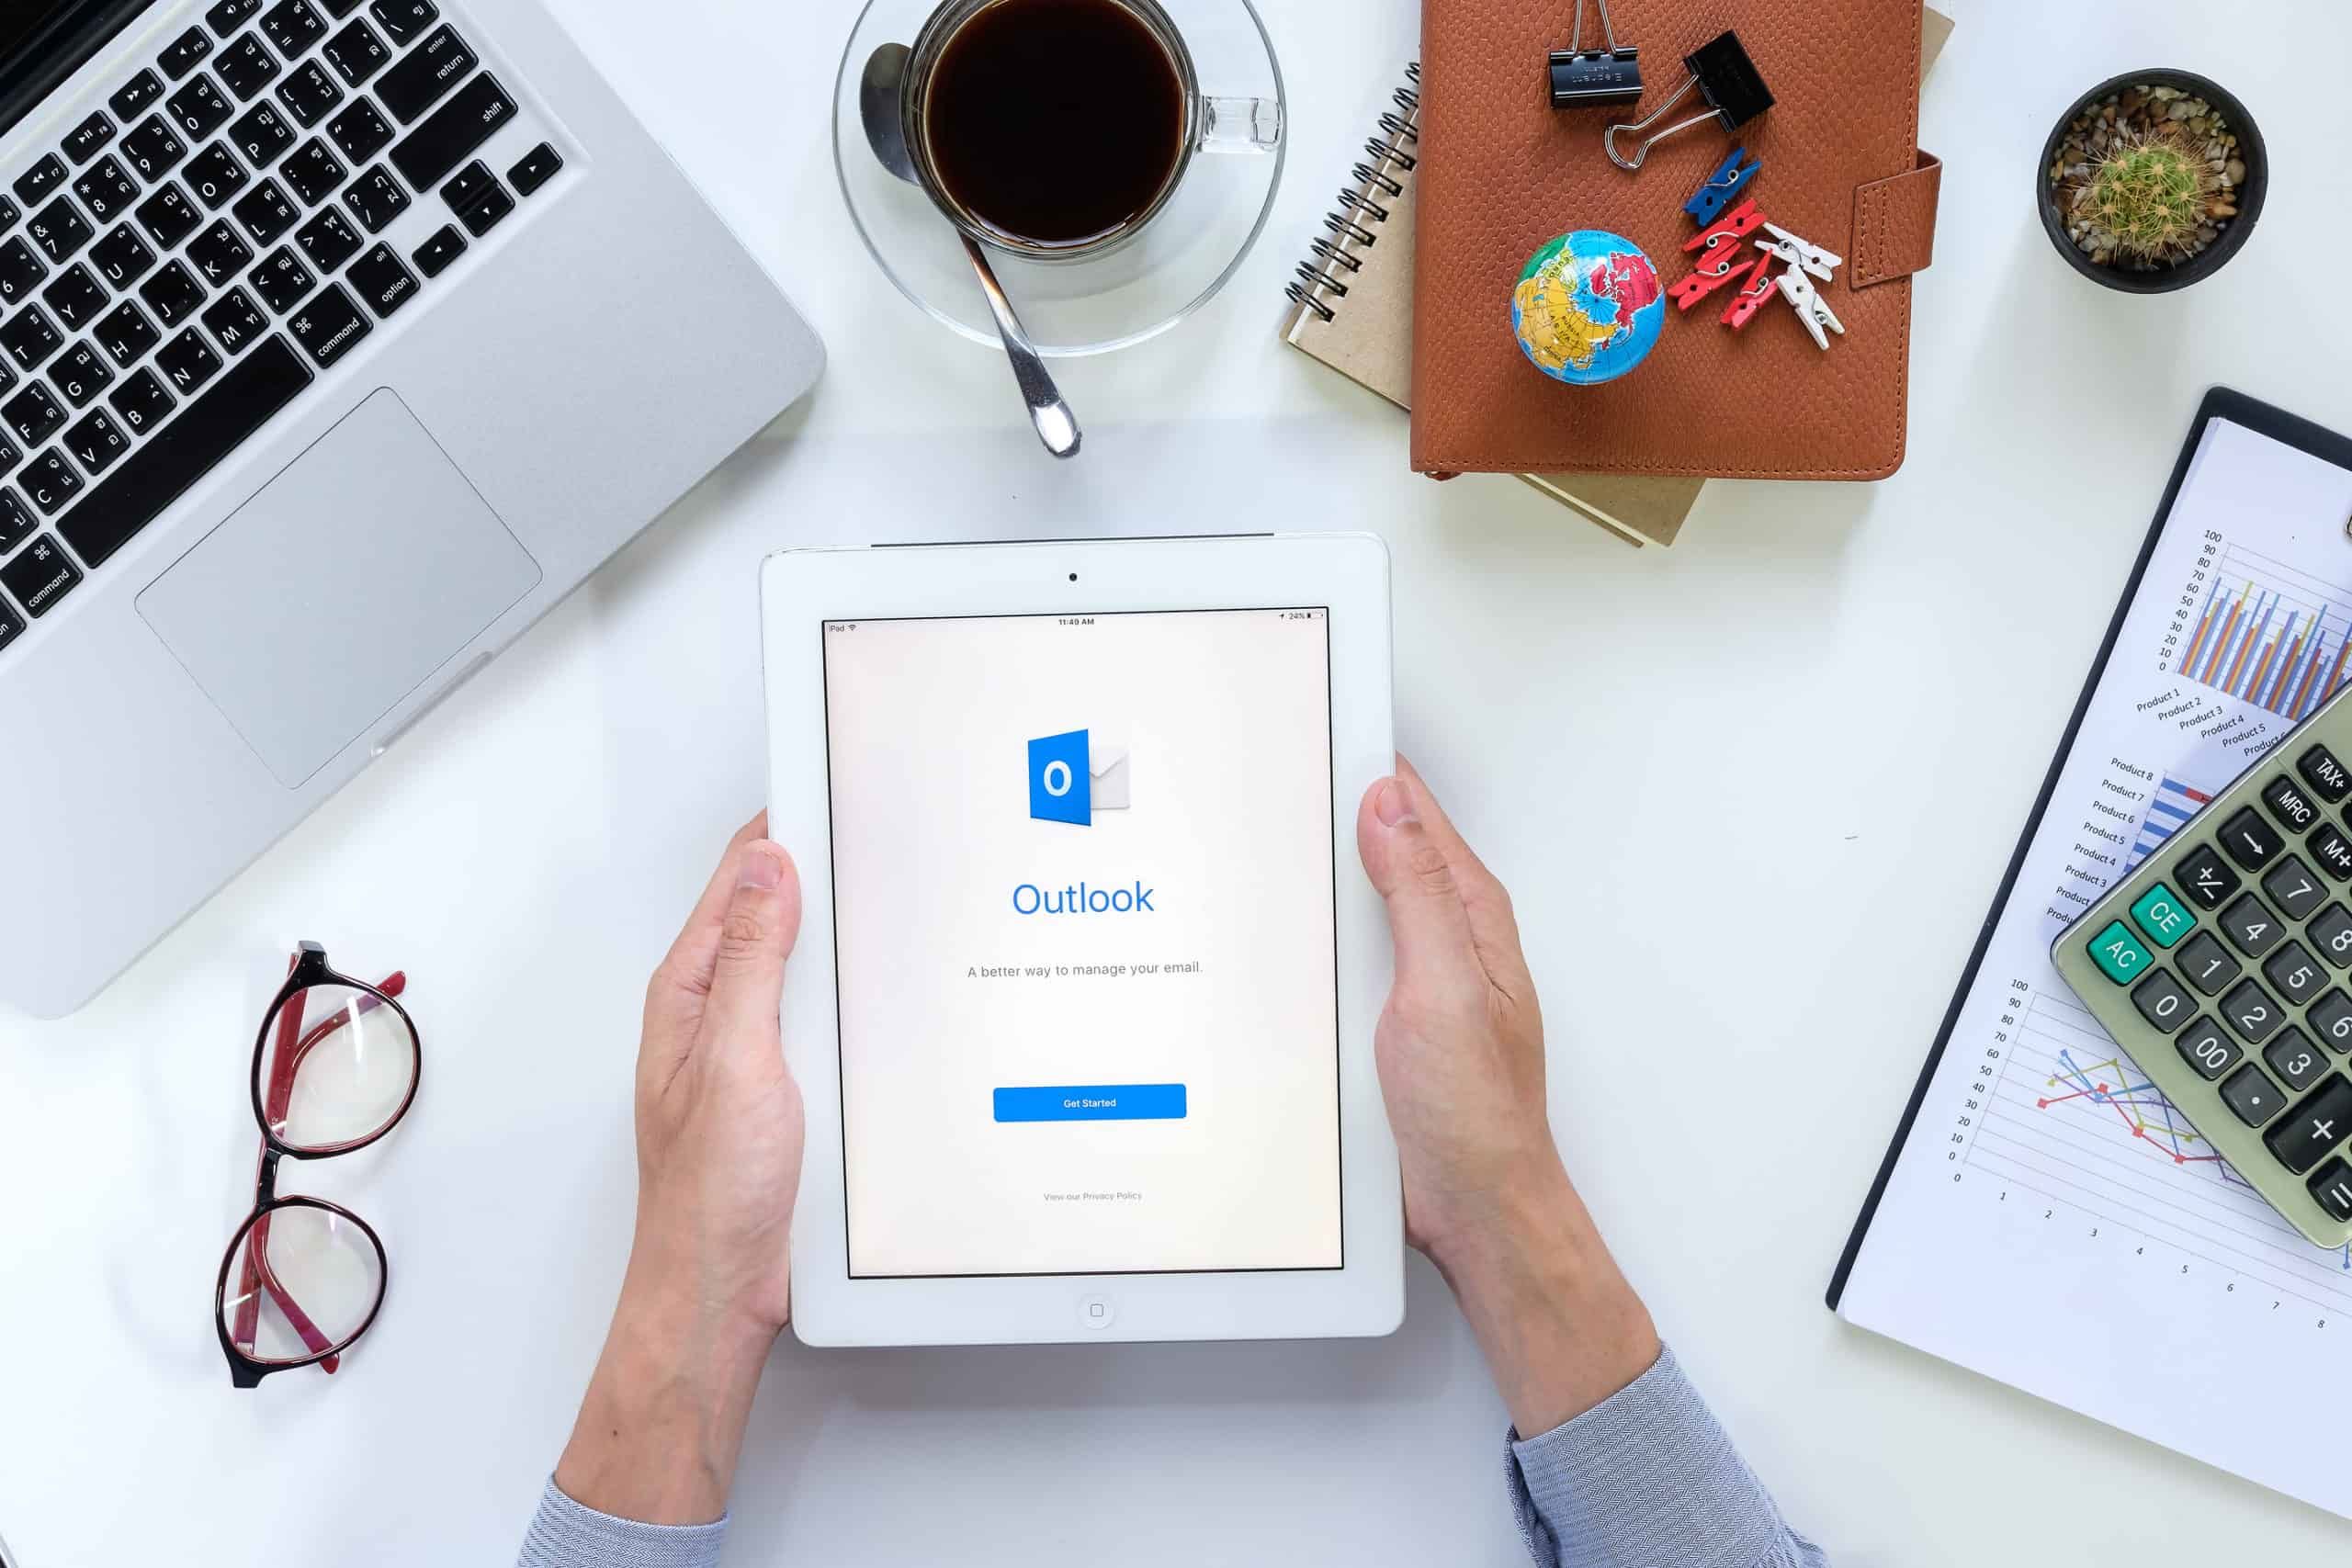 How To Delete An Email Account From Outlook